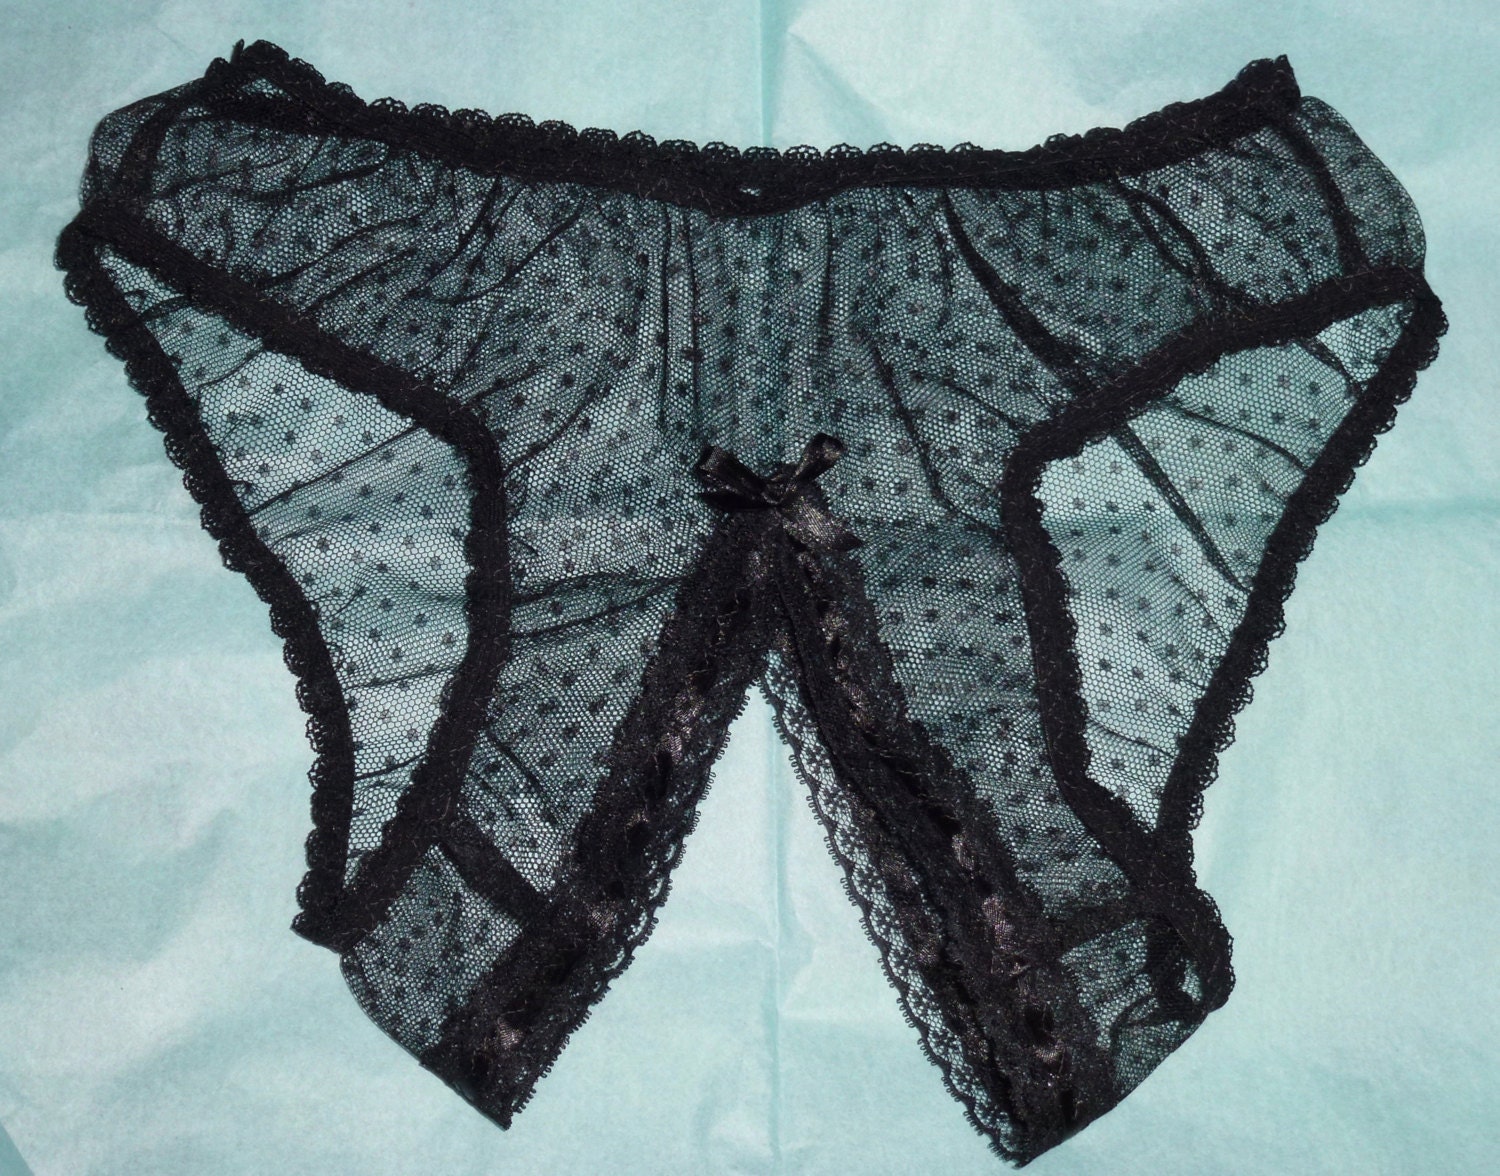 sheer black dotted tulle crotchless burlesque vintage style